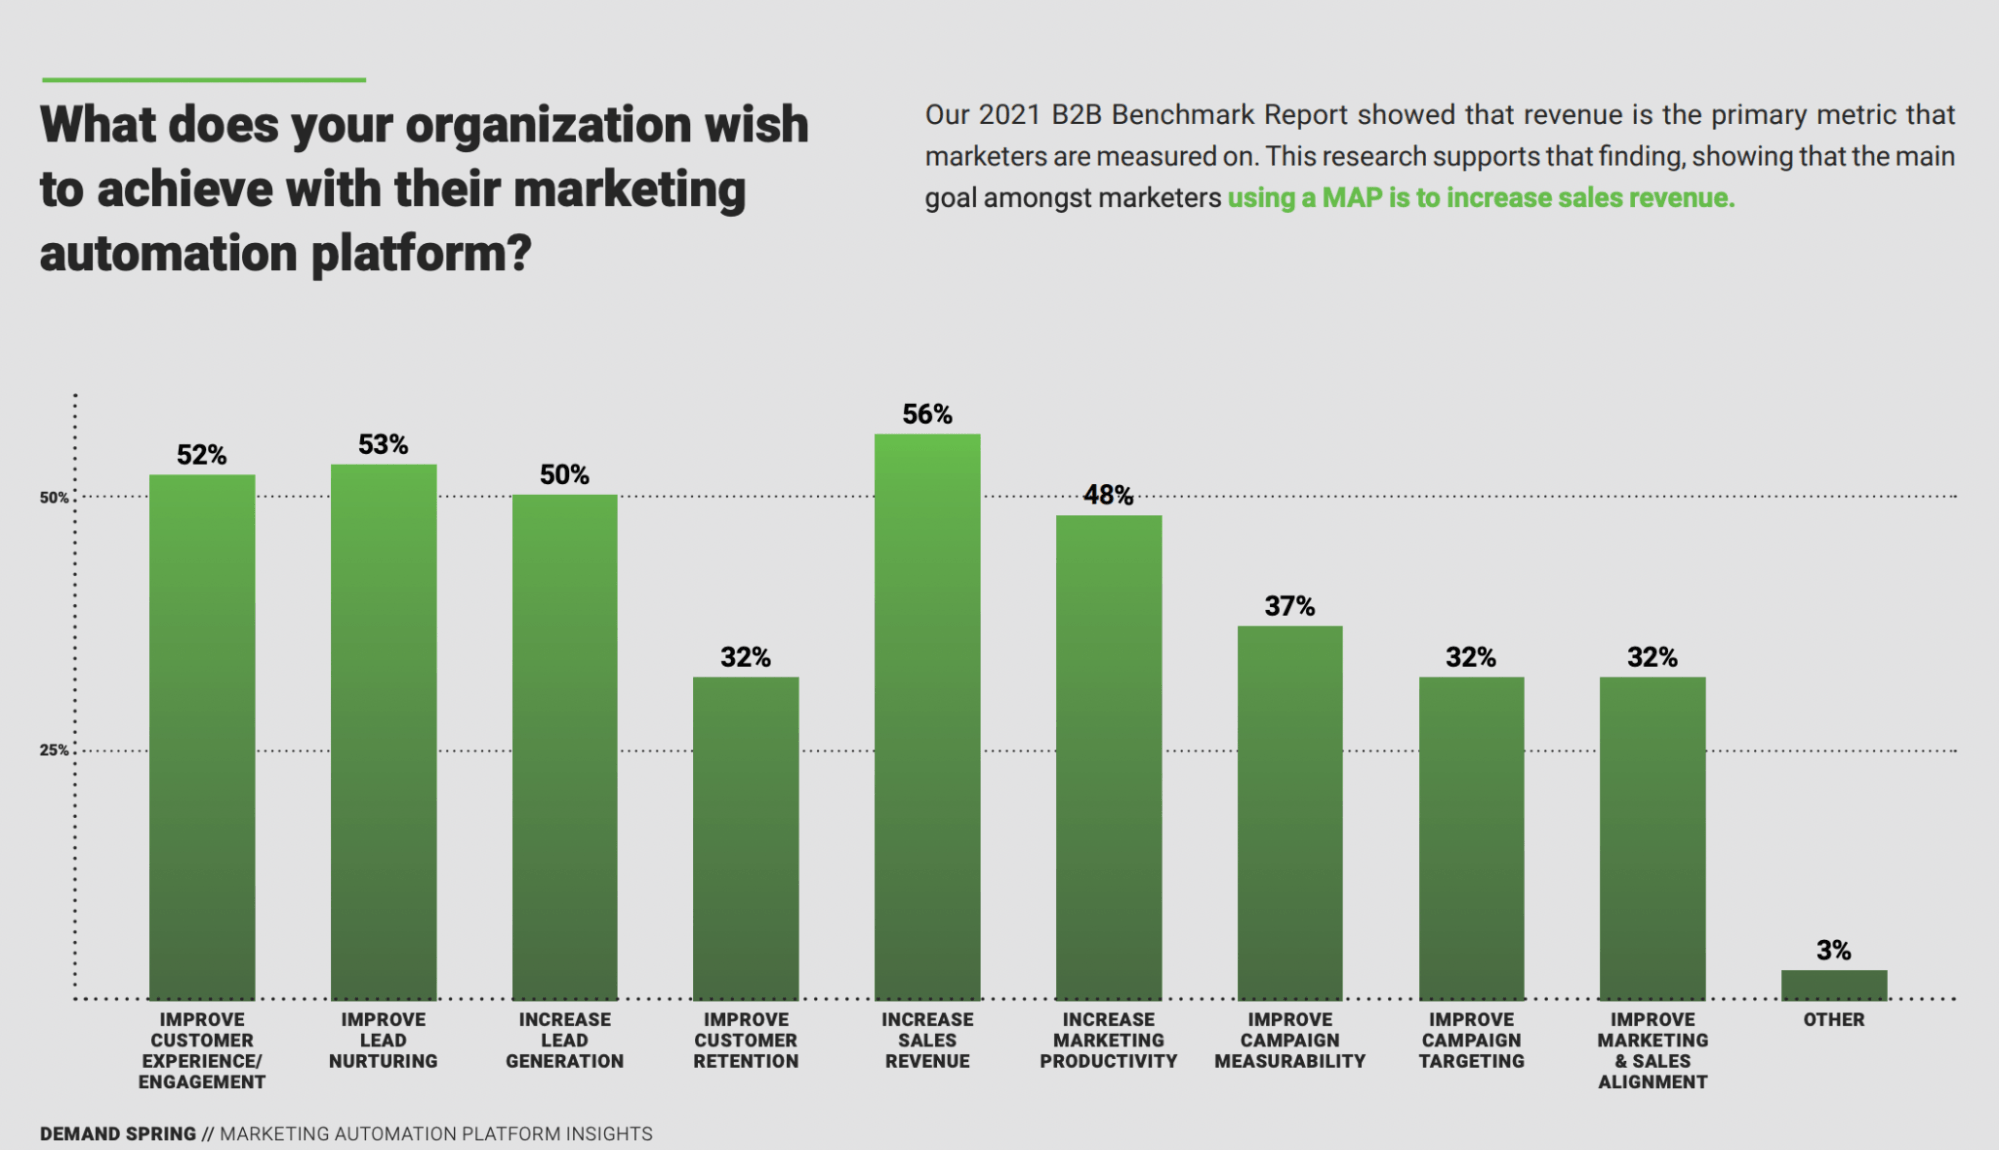 Bar graph showing results of What does your organization wish to achieve with their marketing automation platform?